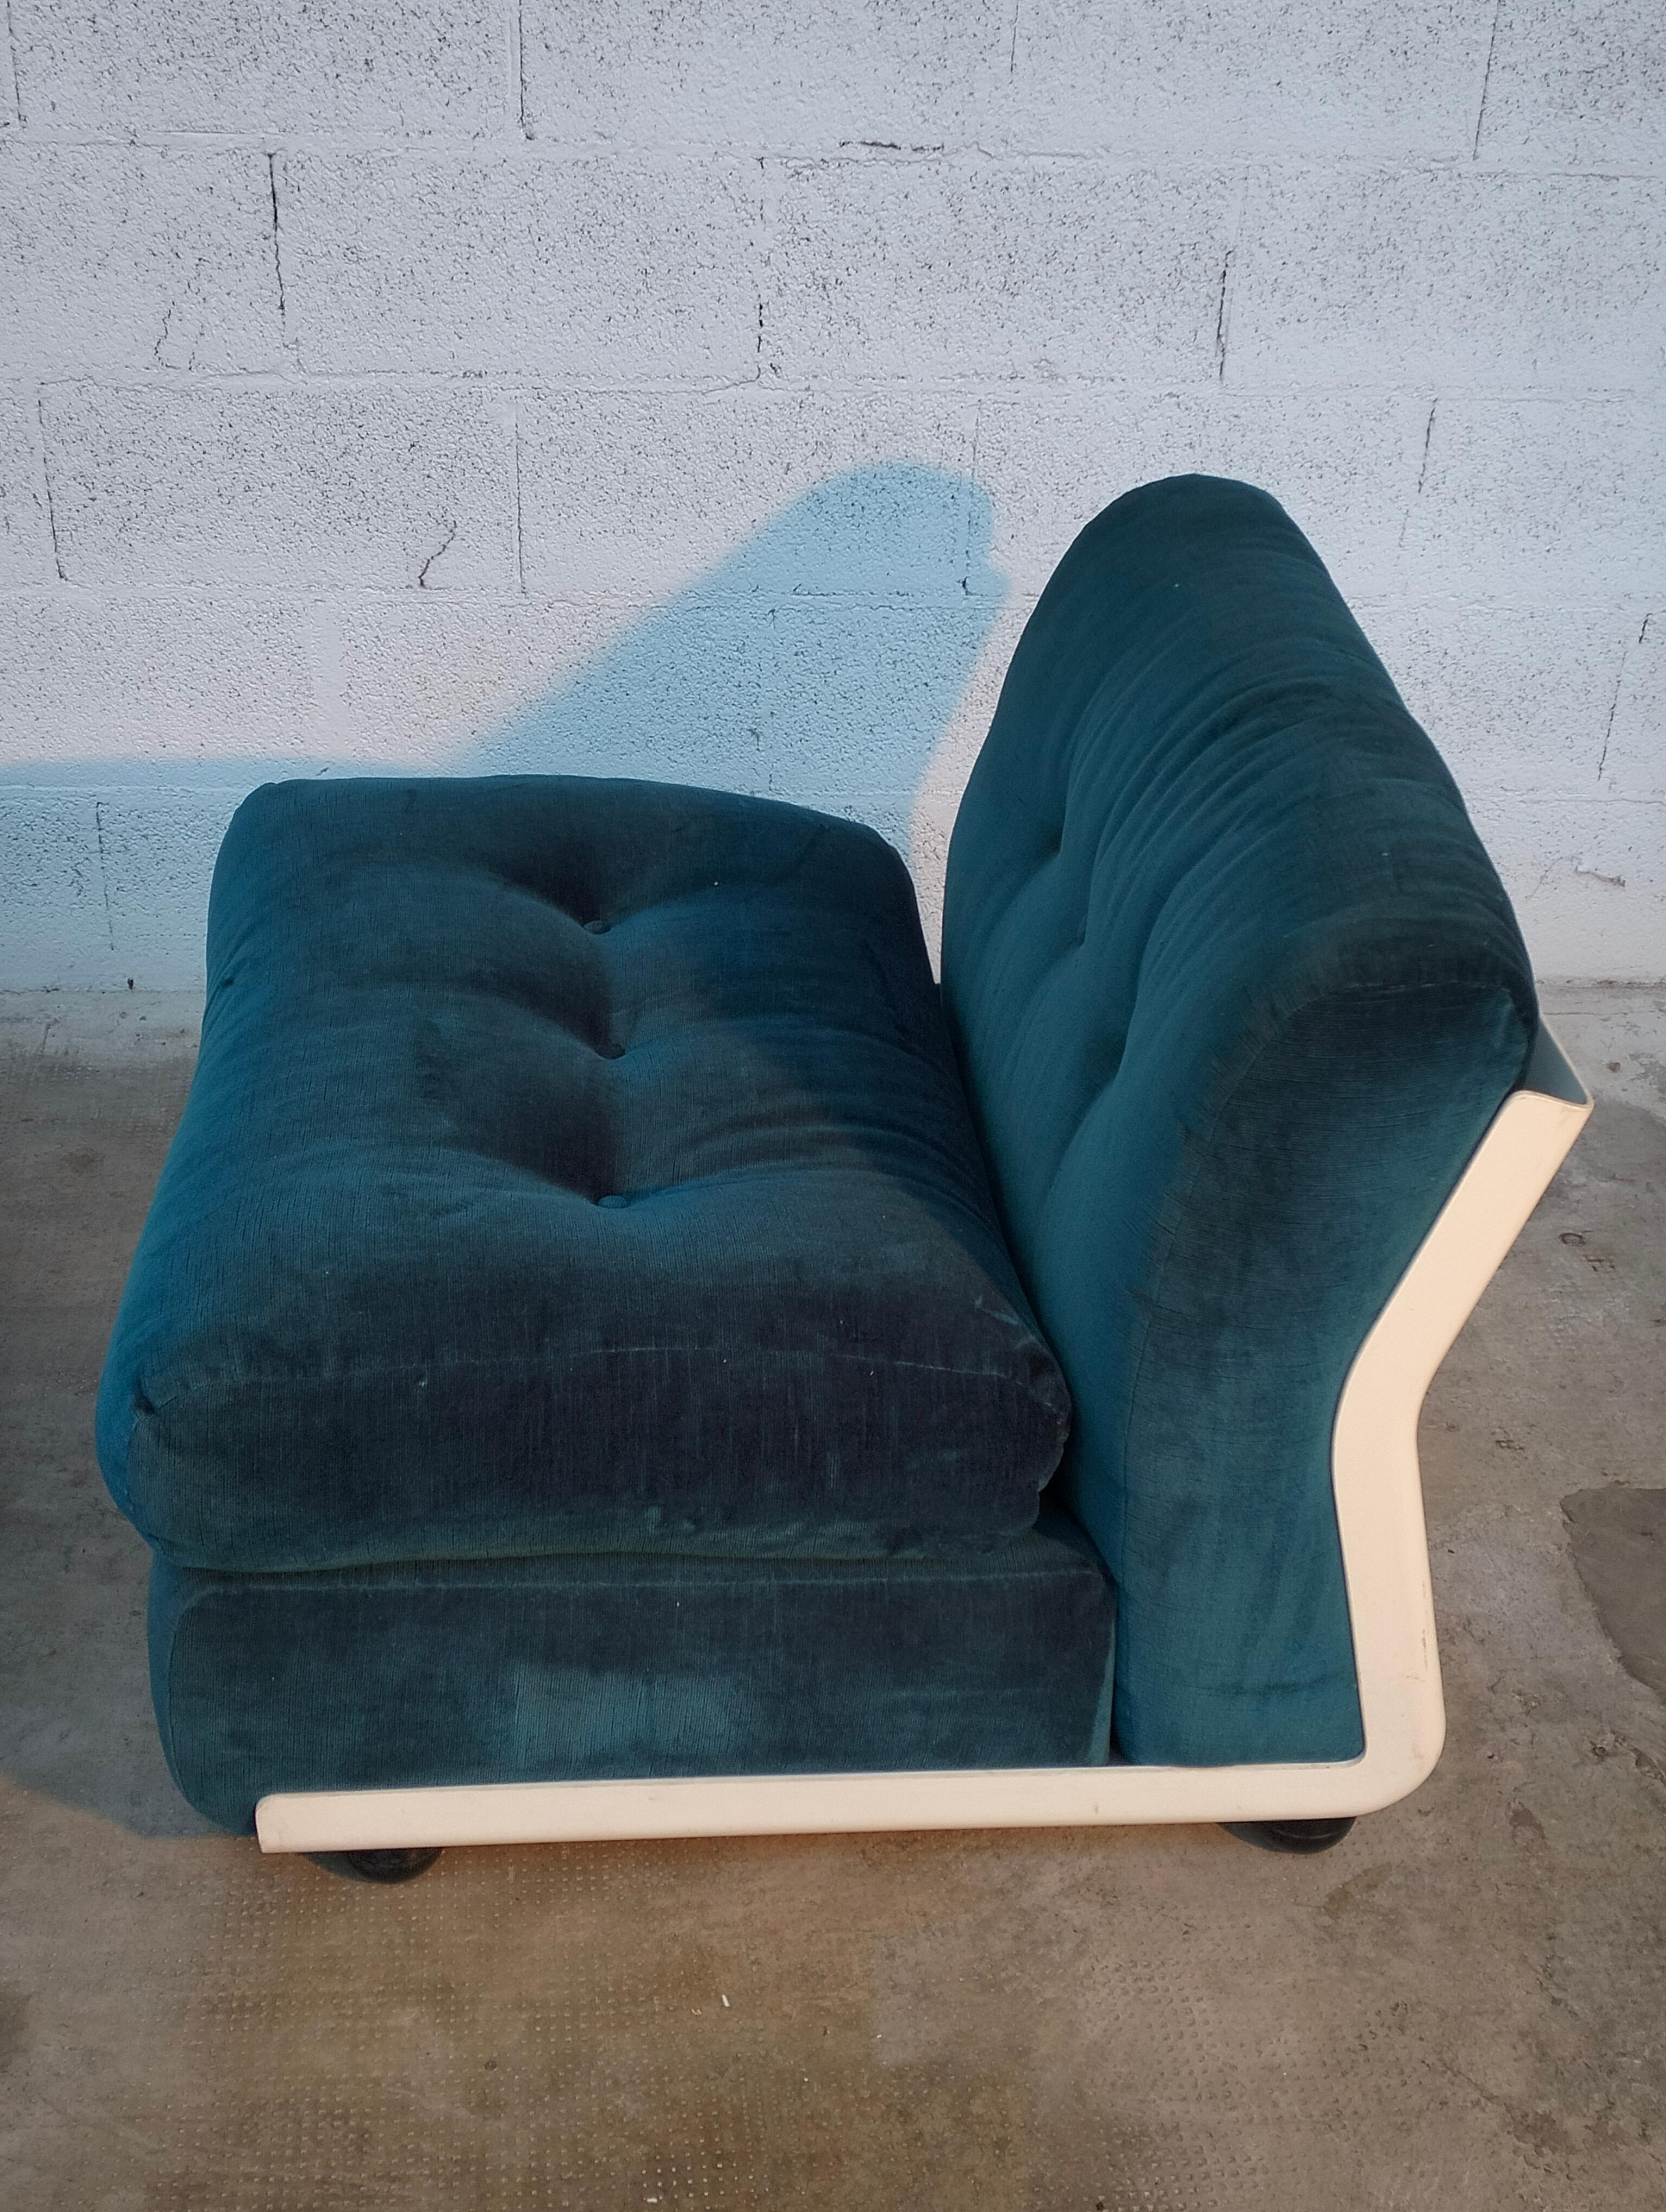 Set of 2 Blue Amanta Lounge Chairs by Mario Bellini for C&B Italia, 1970s For Sale 1